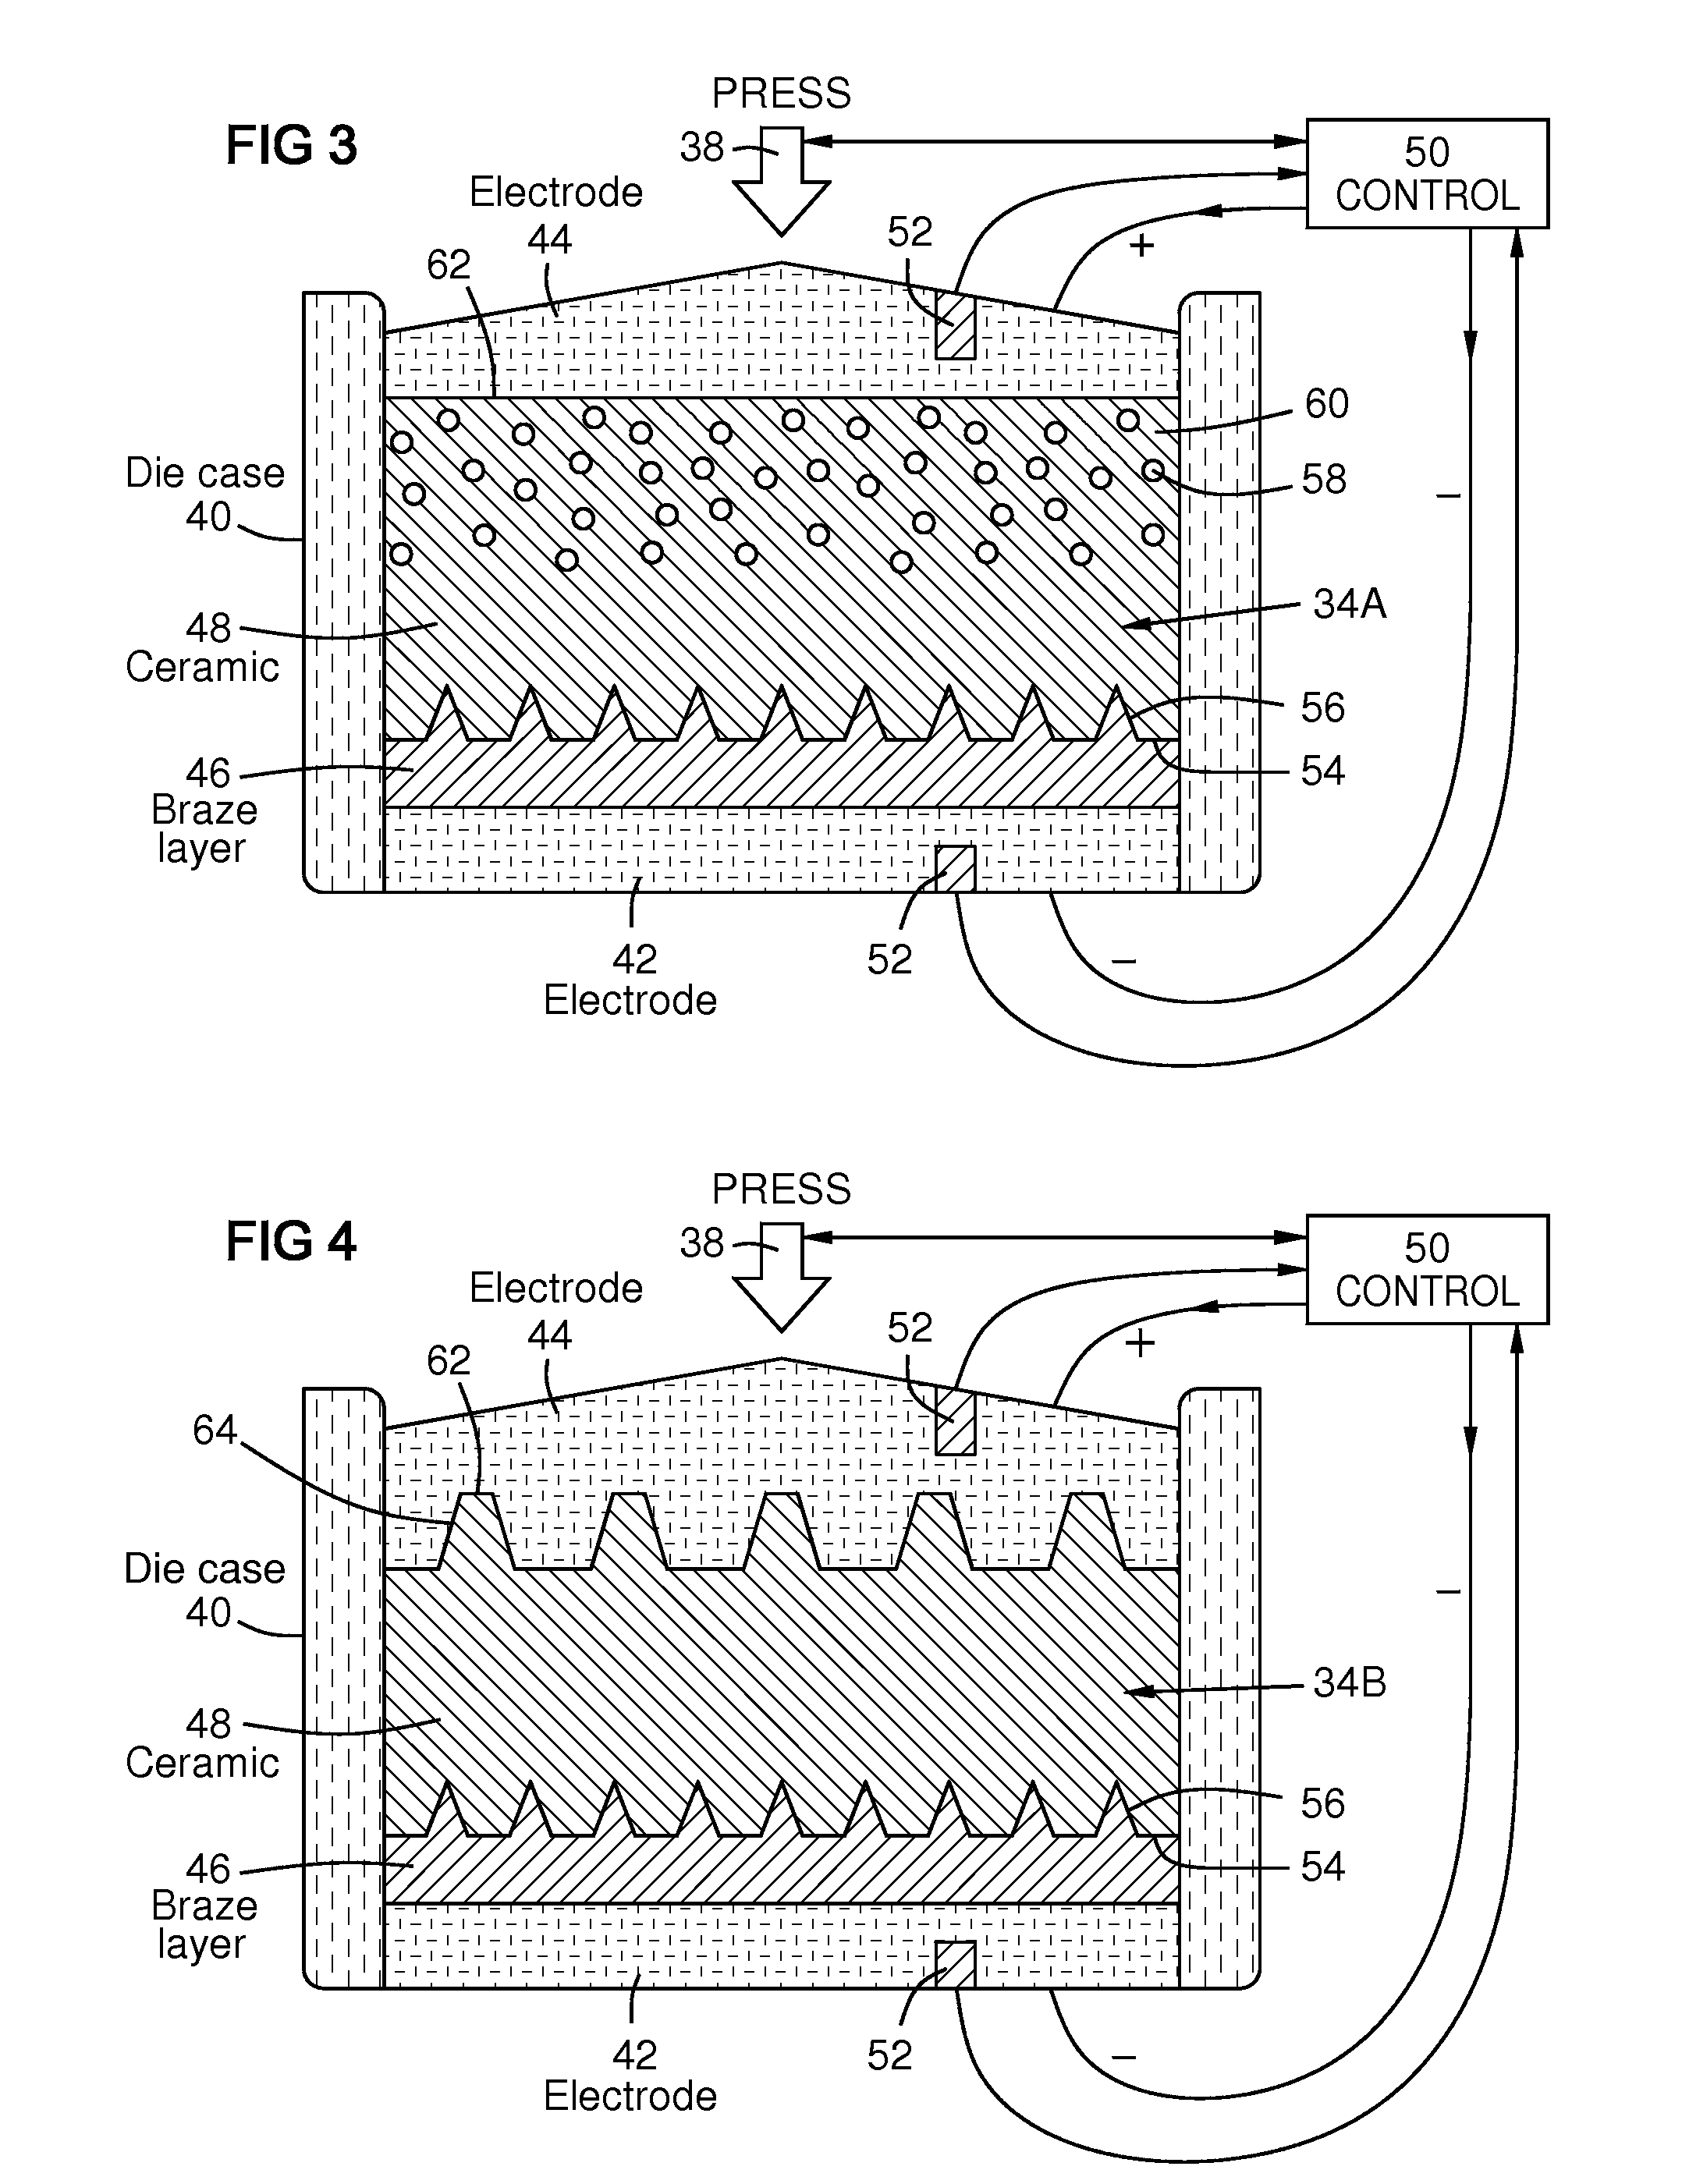 Method and apparatus for fabrication and repair of thermal barriers